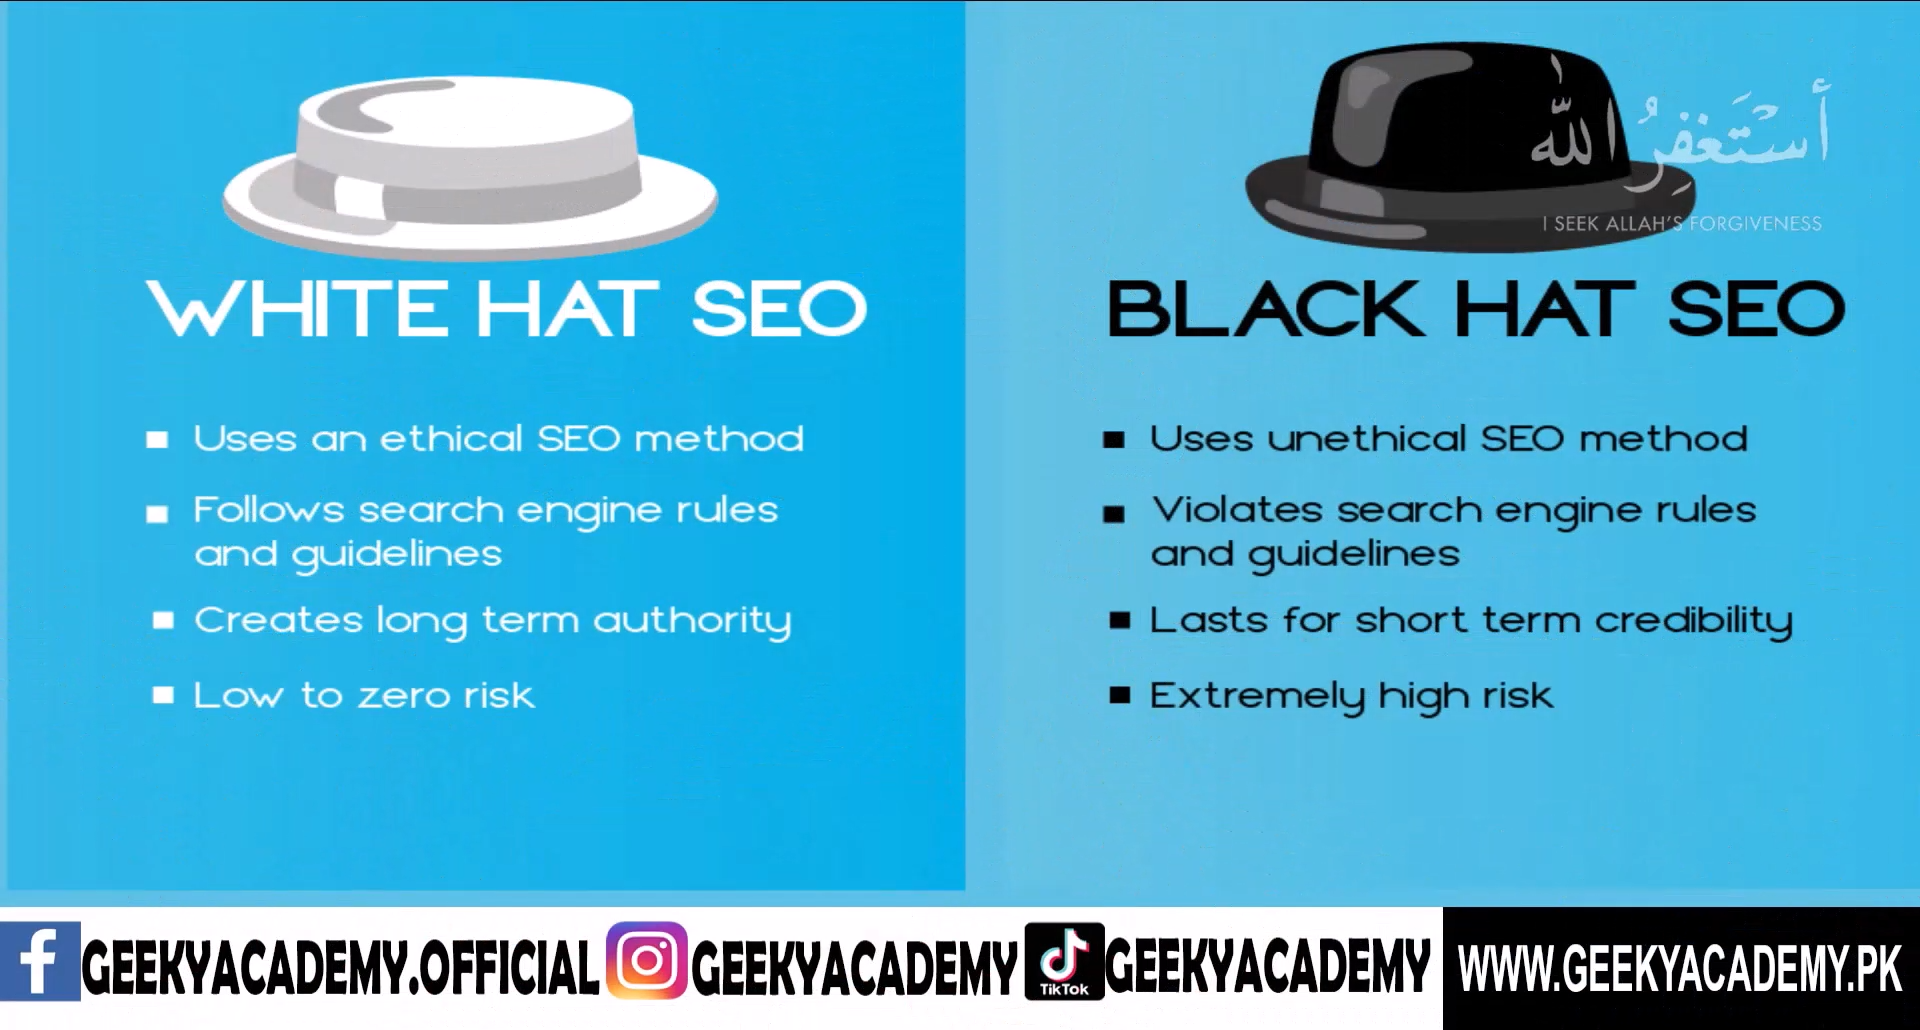 What is the Difference Between White Hat SEO and Black Hat SEO